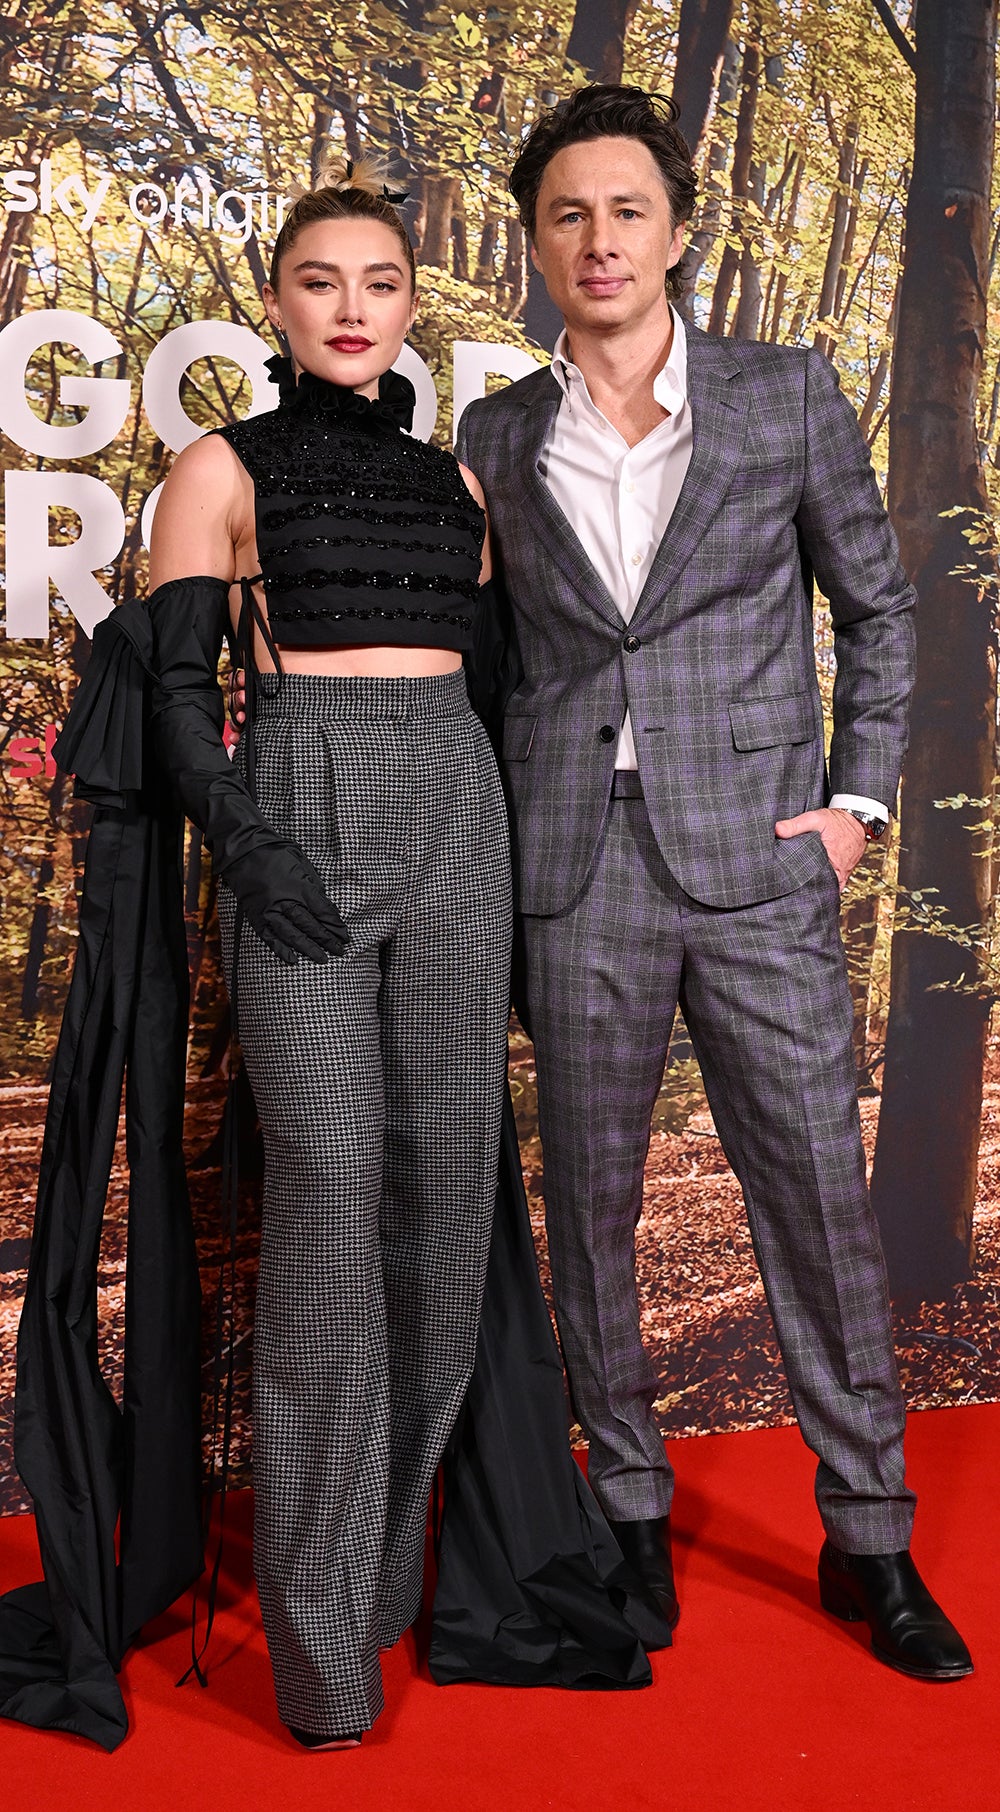 Florence Pugh and Zach Braff at the London premiere of ‘A Good Person'